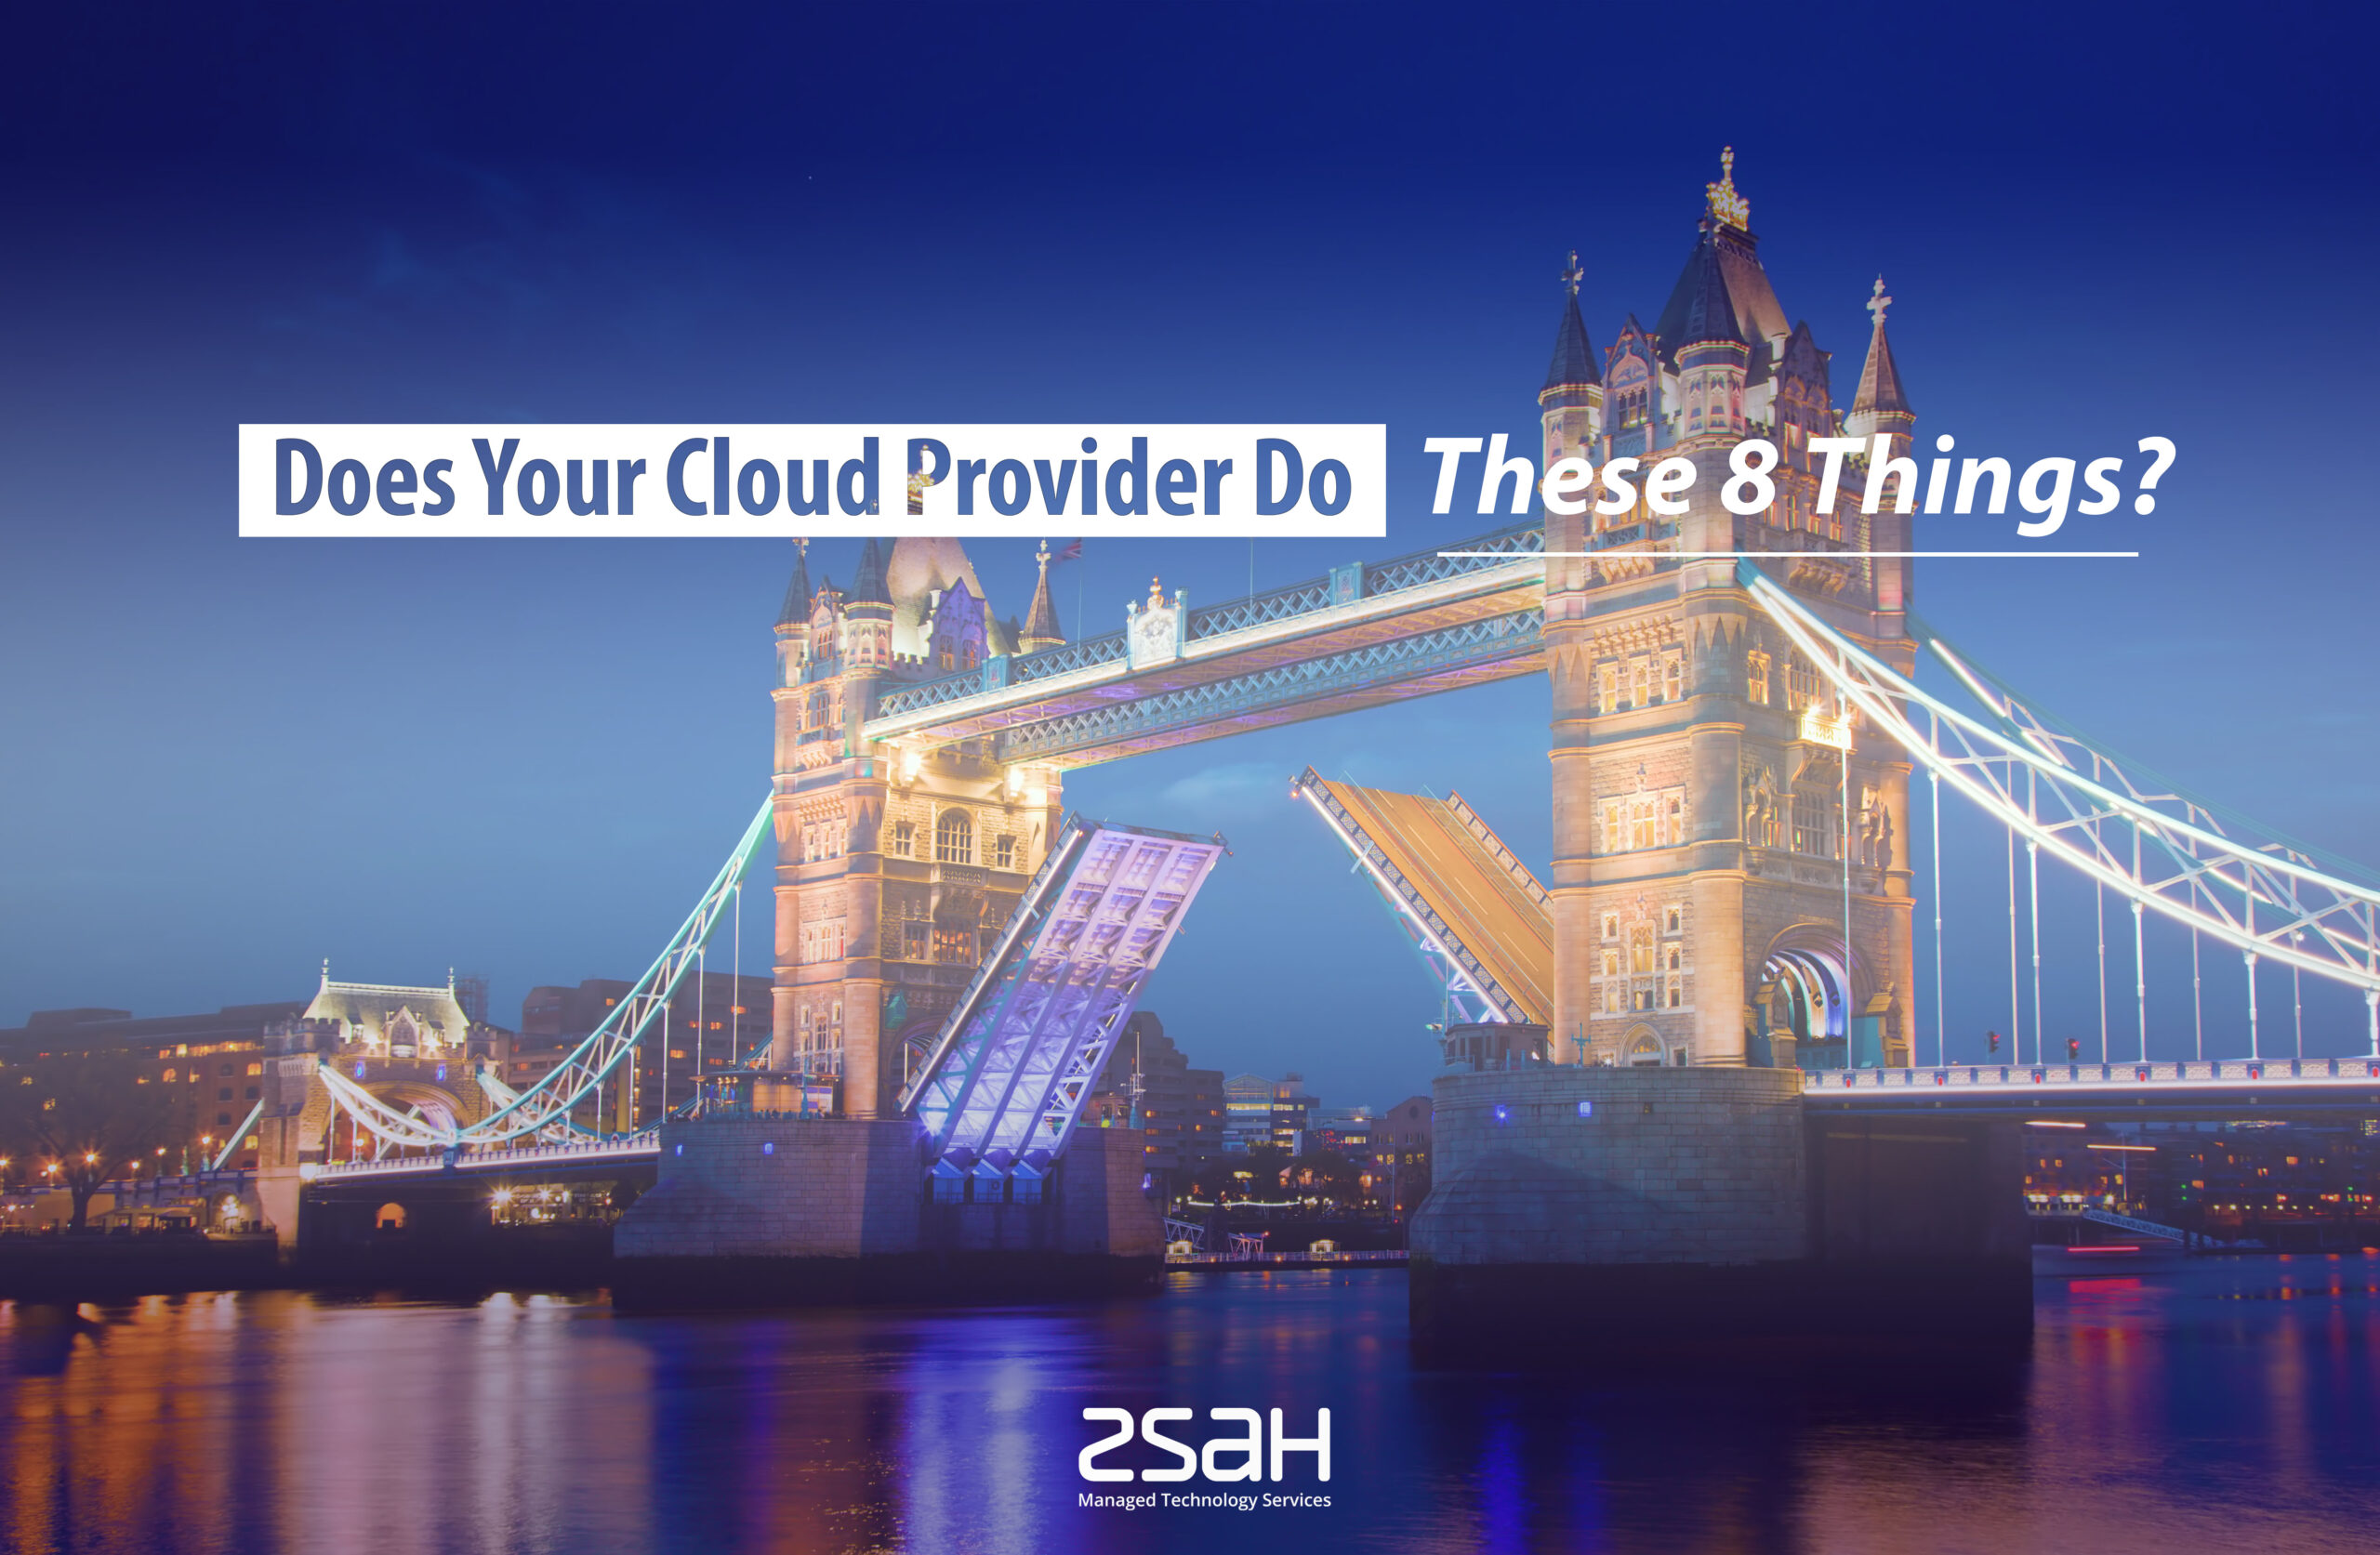 Does Your Cloud Provider Do These 8 Things image - zsah